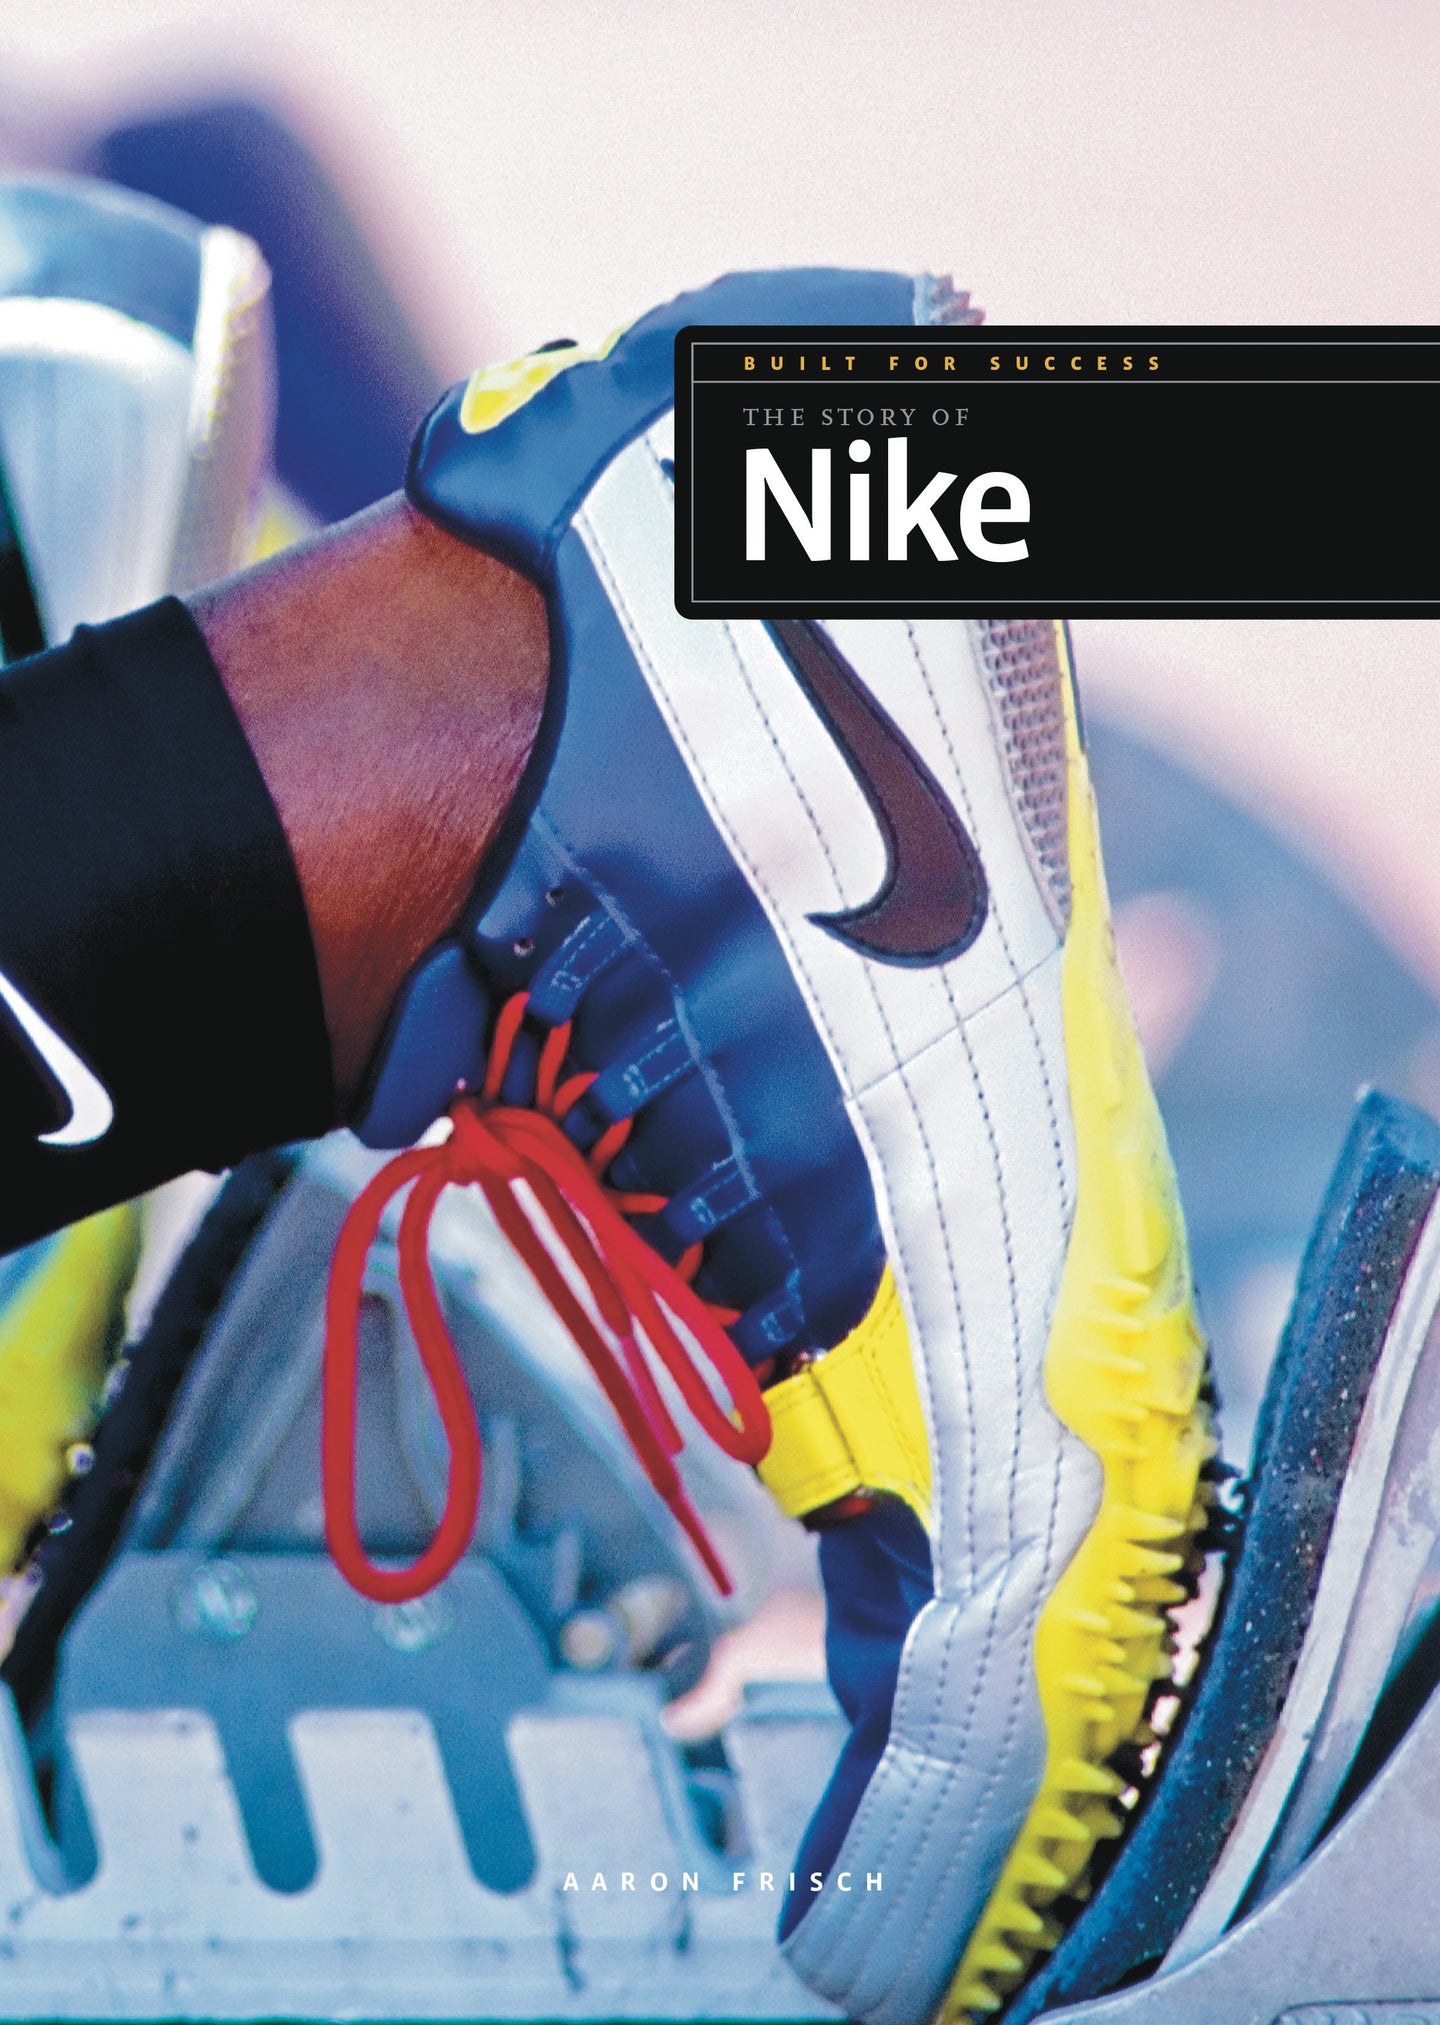 Built for Success: The Story of Nike